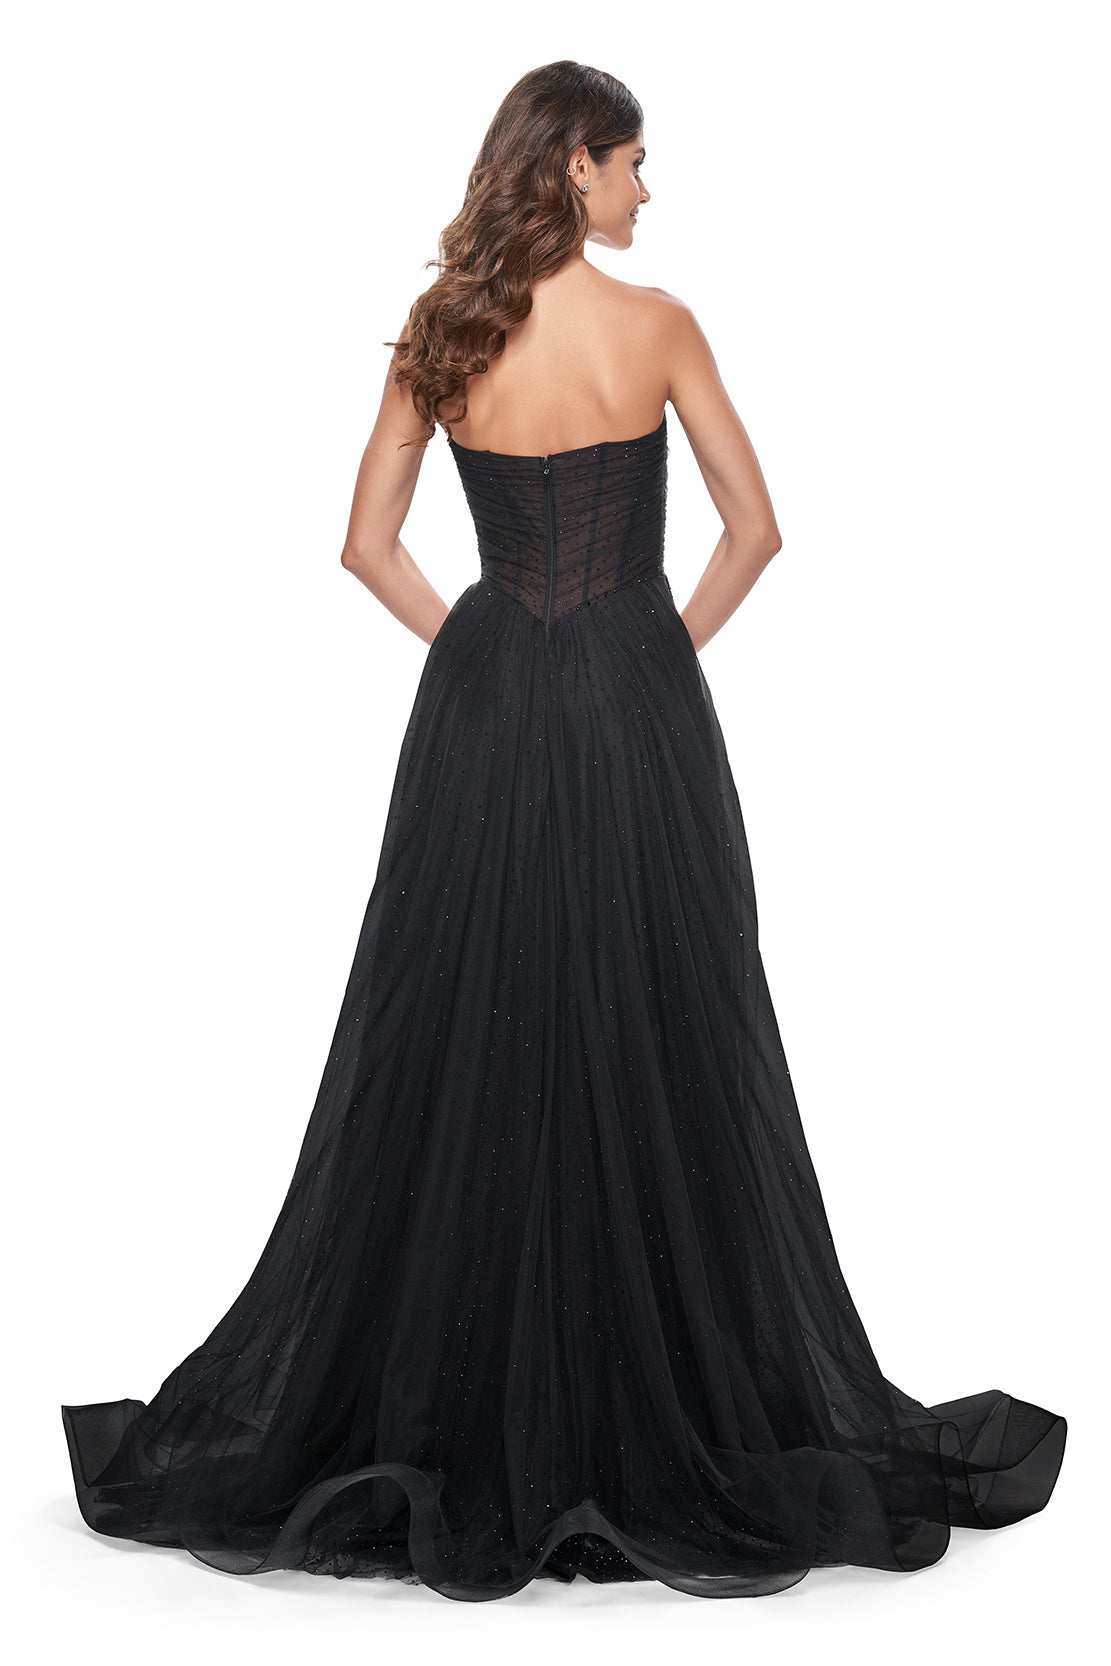 La Femme 32029 Rhinestone Embellished Tulle Gown with High Slit - A glamorous tulle gown adorned with intricate rhinestones, featuring an illusion waist with boning, a strapless bodice, and a captivating high slit. Ideal for proms and formal evening events.